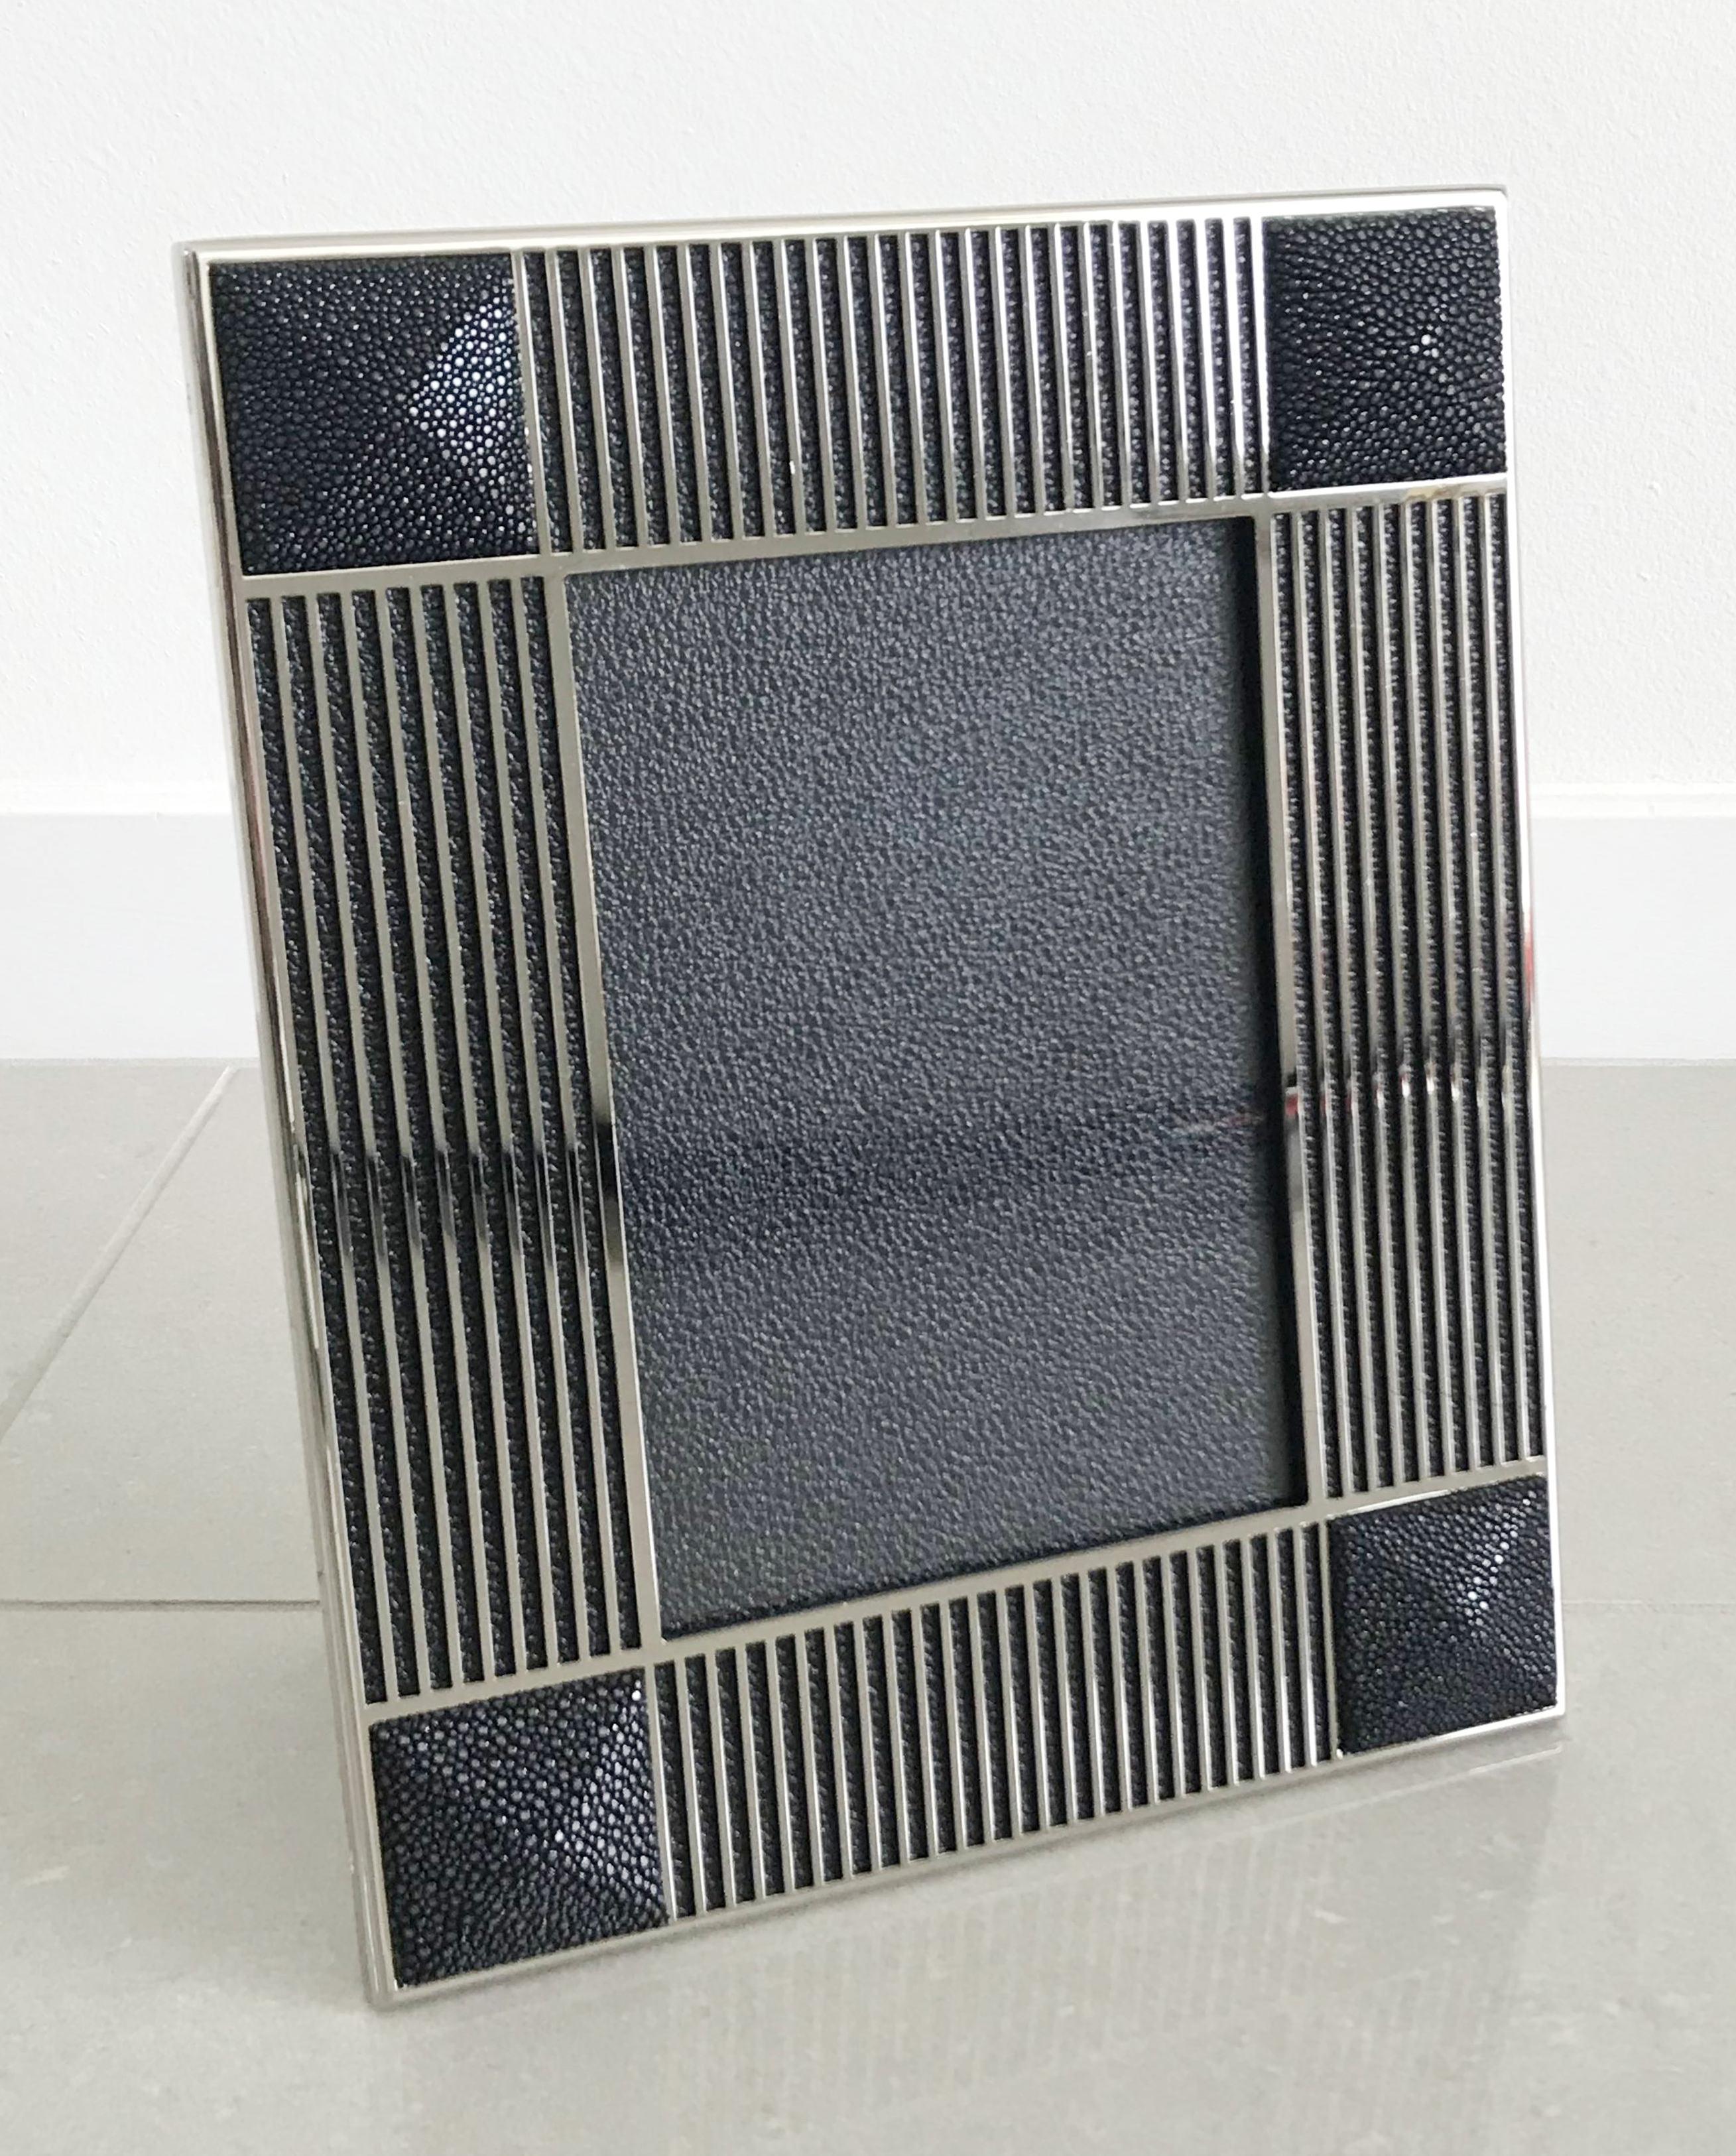 Black shagreen leather and nickel-plated picture frame by Fabio Ltd
Measures: Height 10.5 inches, width 8.5 inches, depth 1 inch
Photo size: 5 inches by 7 inches
1 in stock in Palm Springs currently ON 30% OFF SALE for $875 !!
Order Reference #: